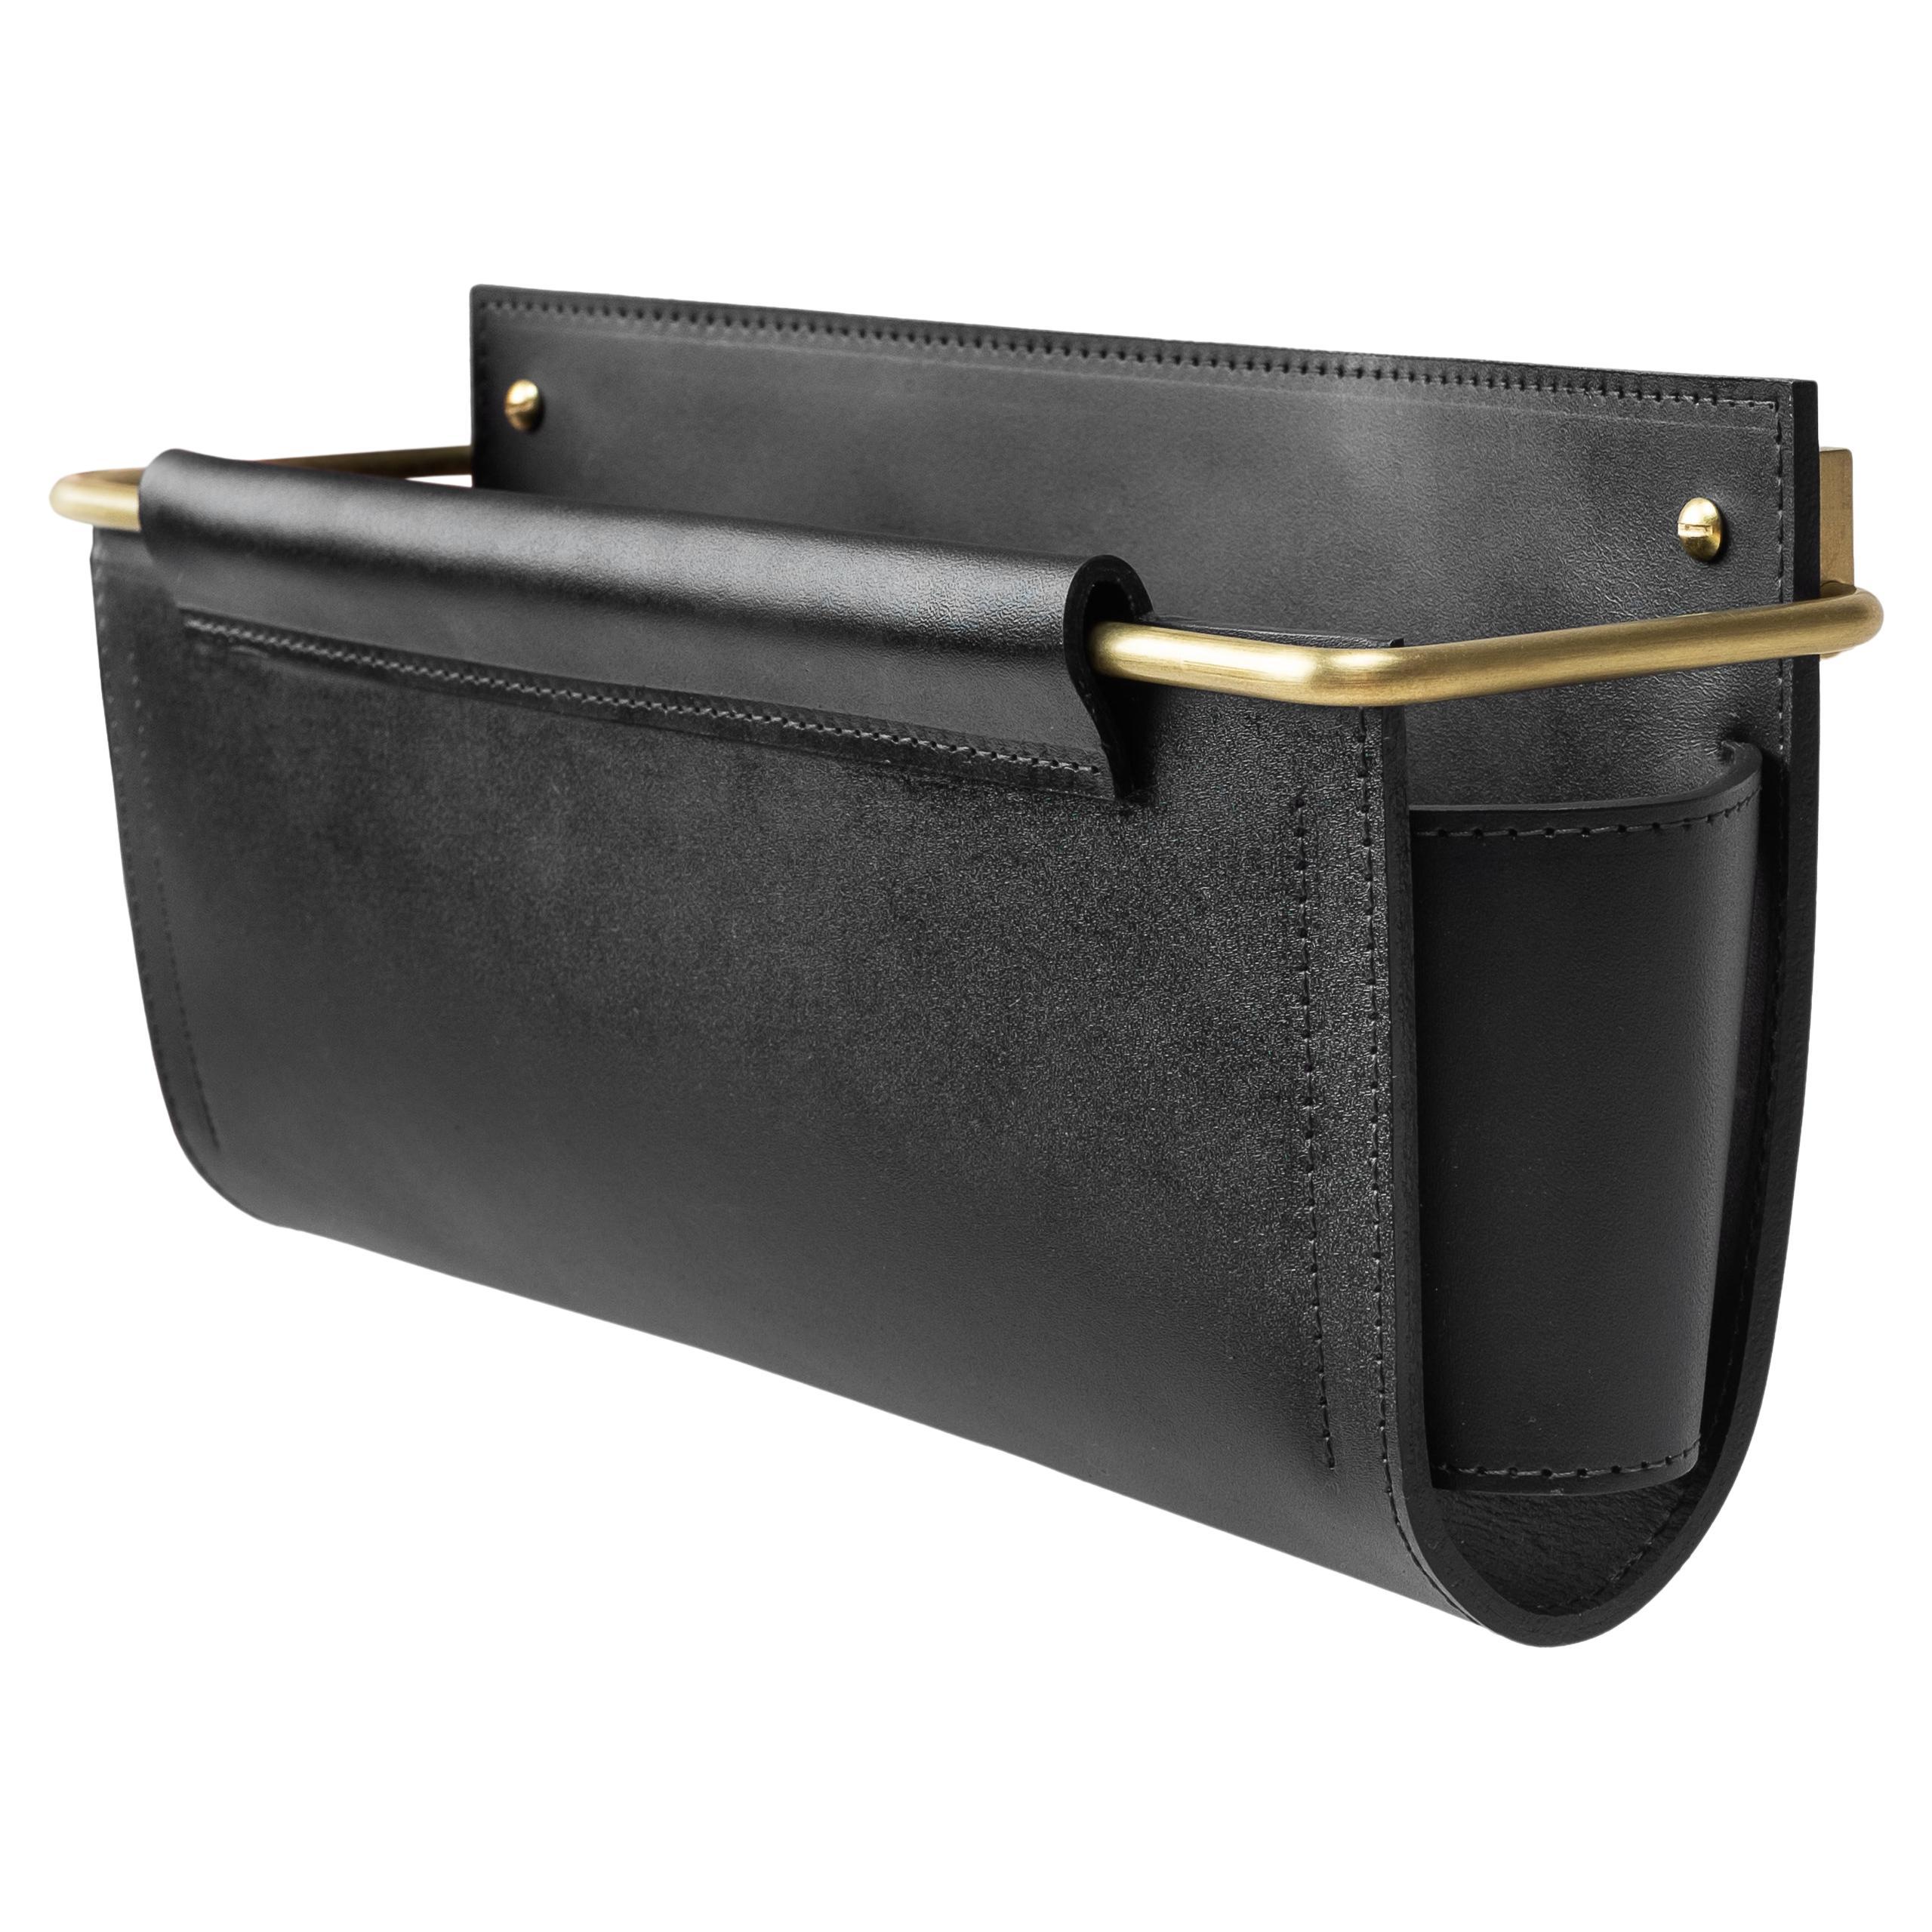 12" x 8" Black Leather/Brass Wall Pocket by Moses Nadel